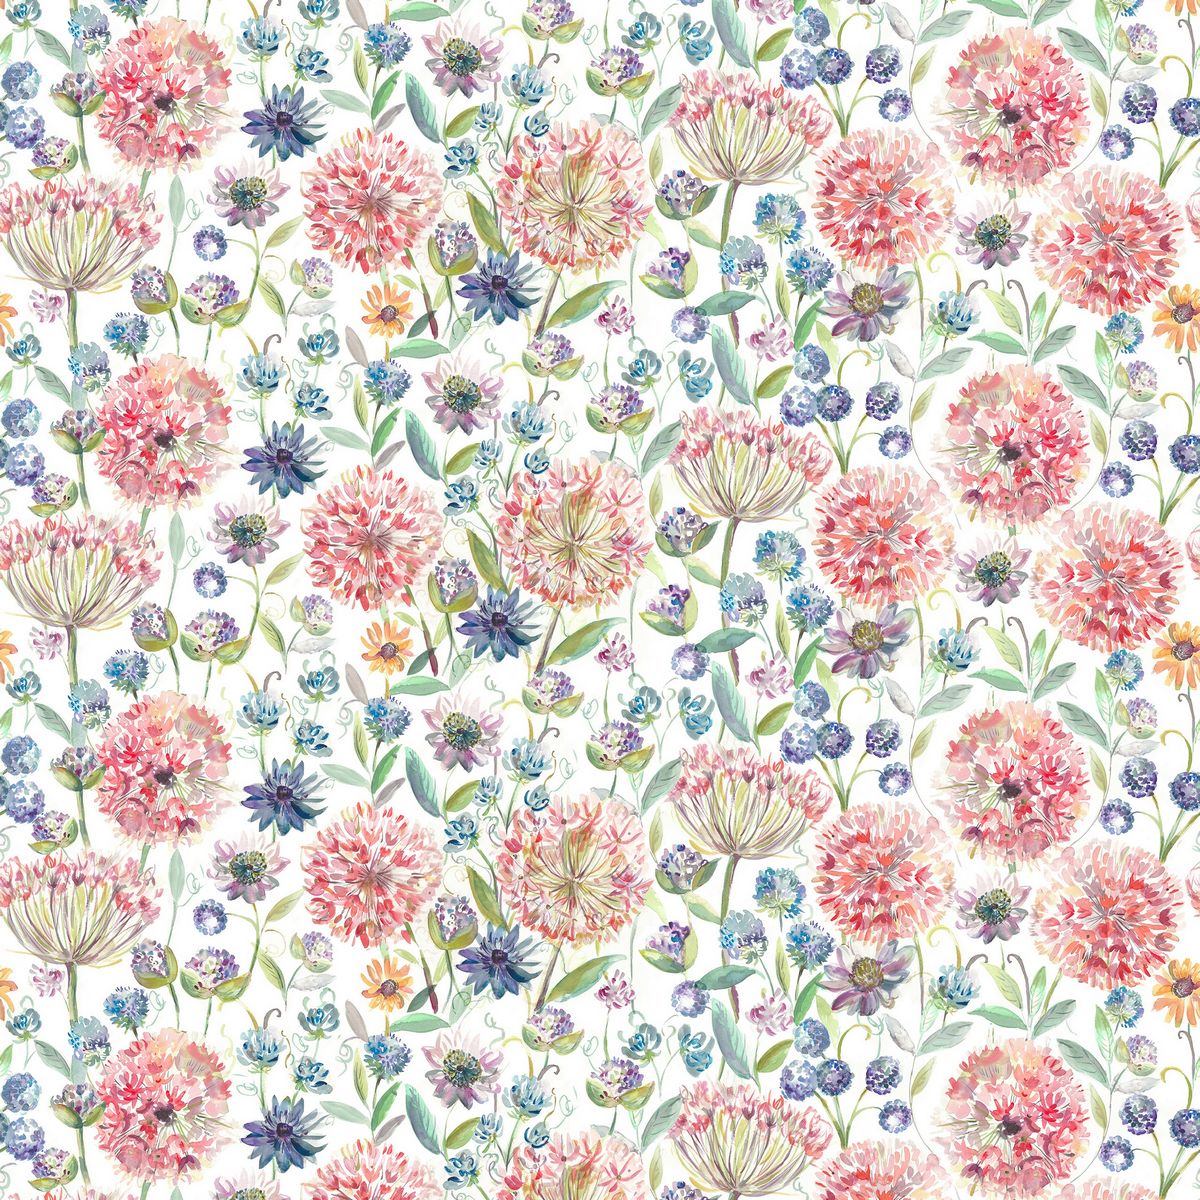 Pompom Floral Summer Cream Fabric by Voyage Maison